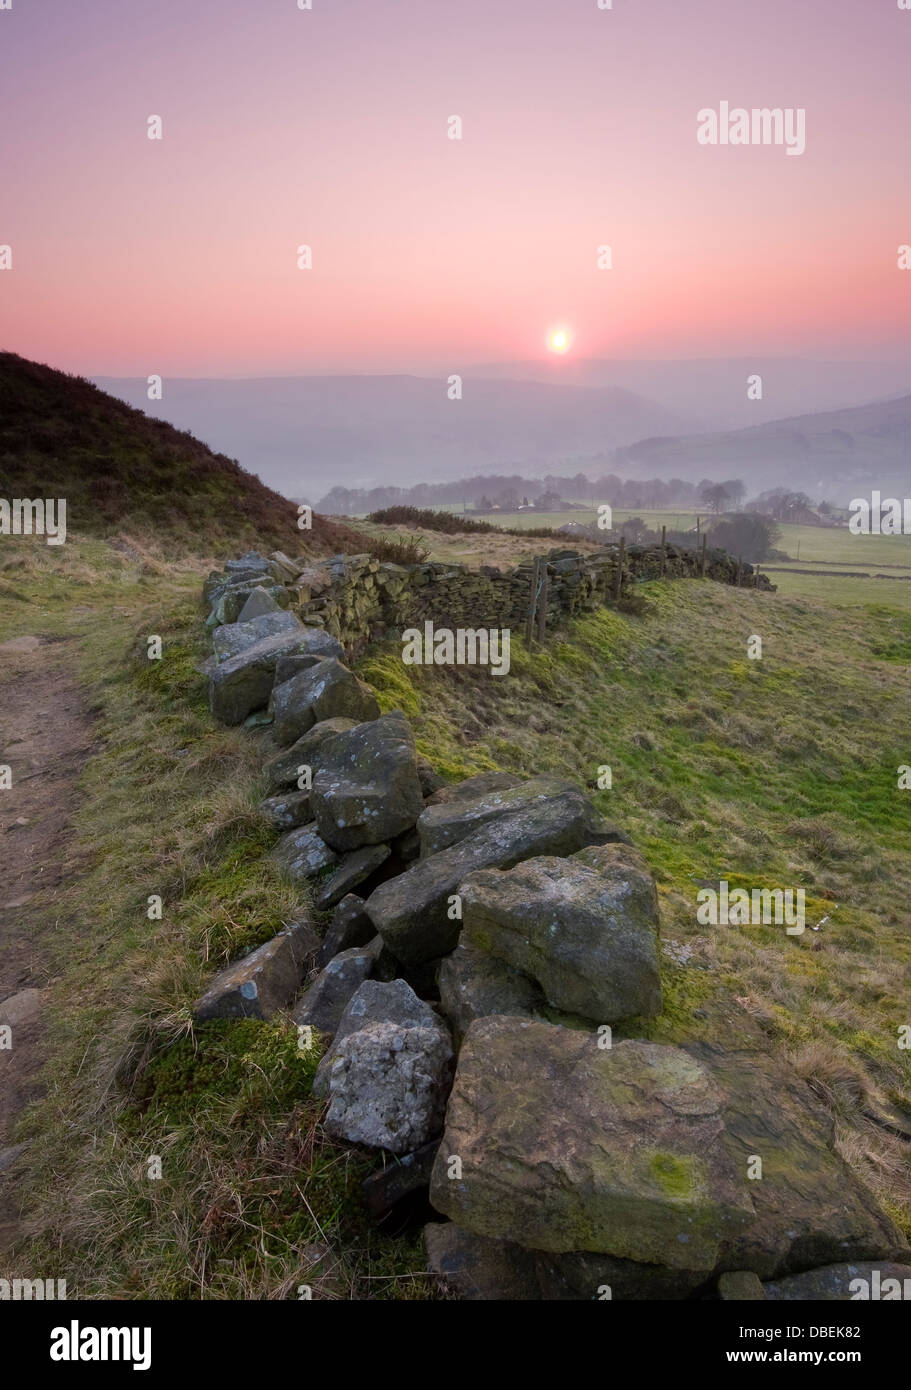 A typical Yorkshire dry stone wall leading the eye down towards a misty valley Stock Photo